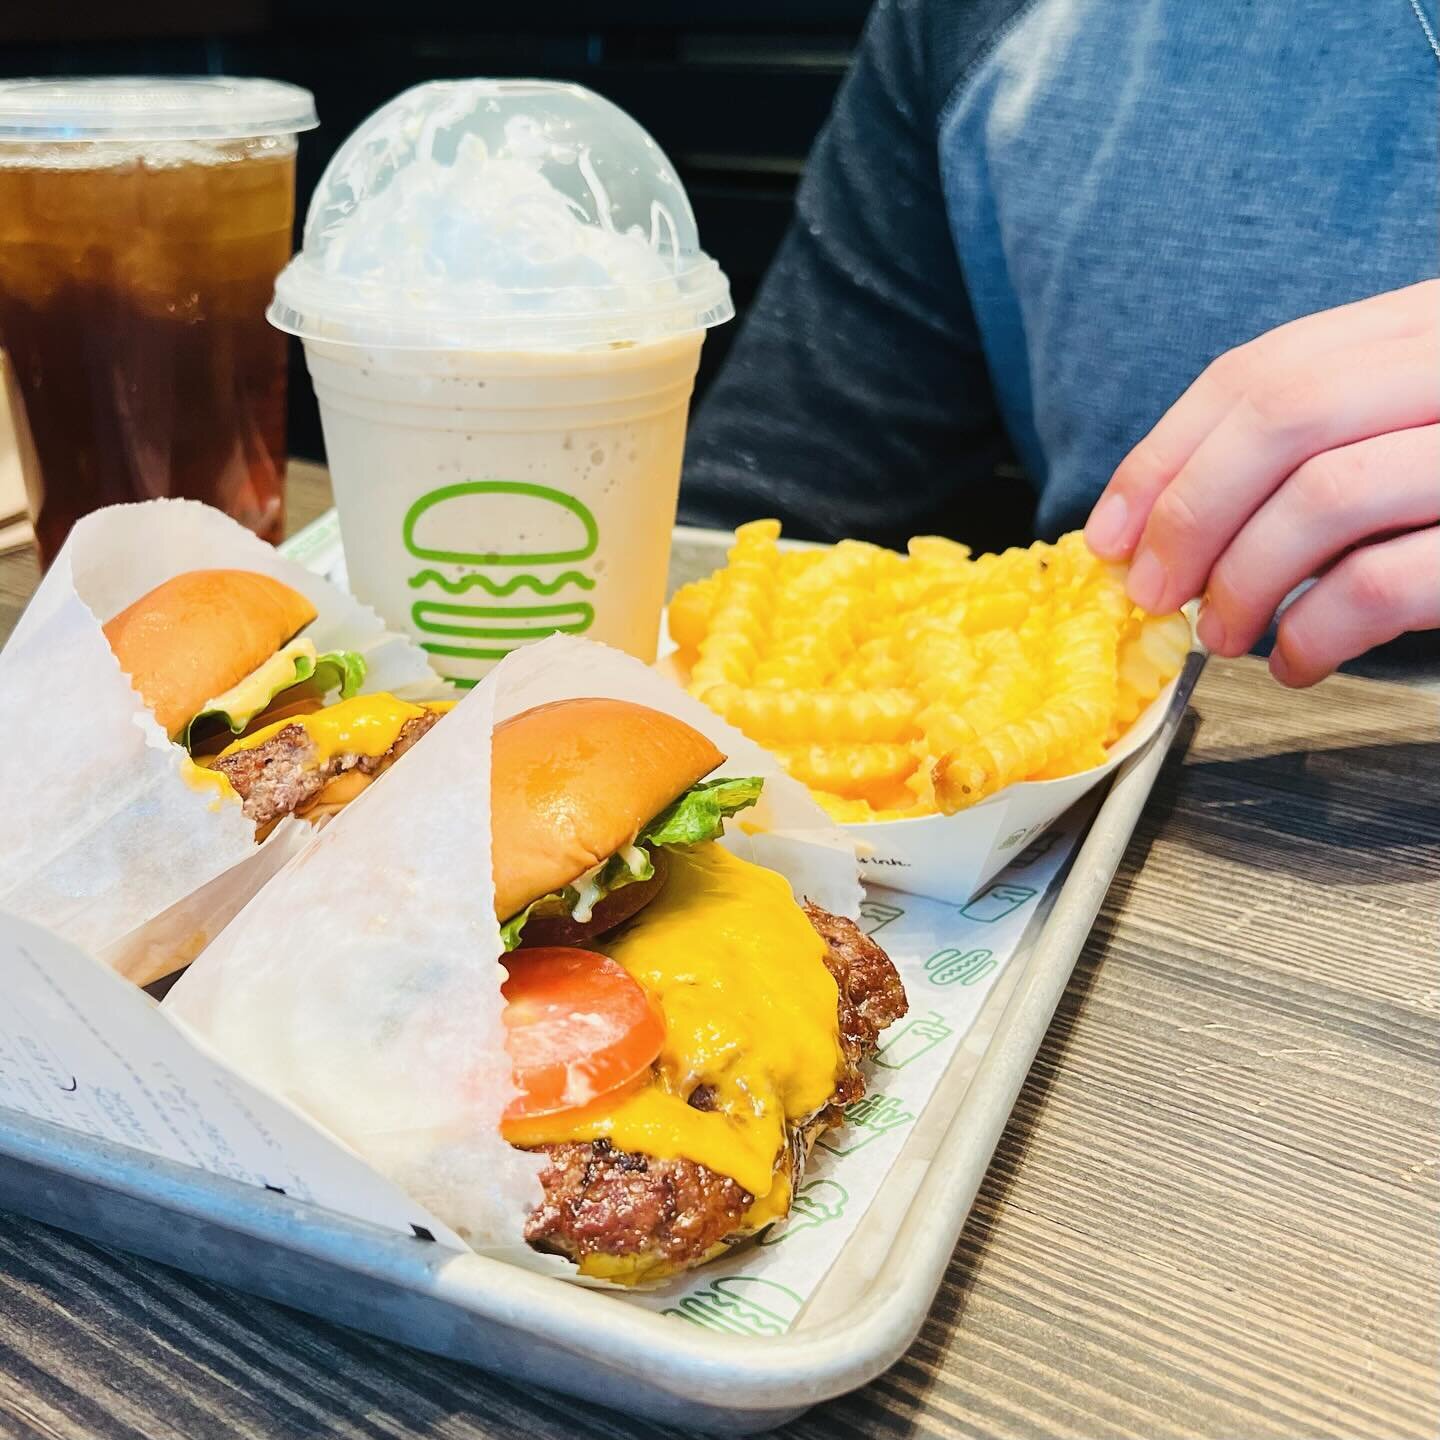 Didn&rsquo;t make it back up to The Big Apple today due to yours truly hurting her ribs somehow&mdash; so today was spent exploring Philly hand in hand with my love! 🏙️👫 From savoring Shake Shack delights (@pulledanadam aren&rsquo;t you happy I mad